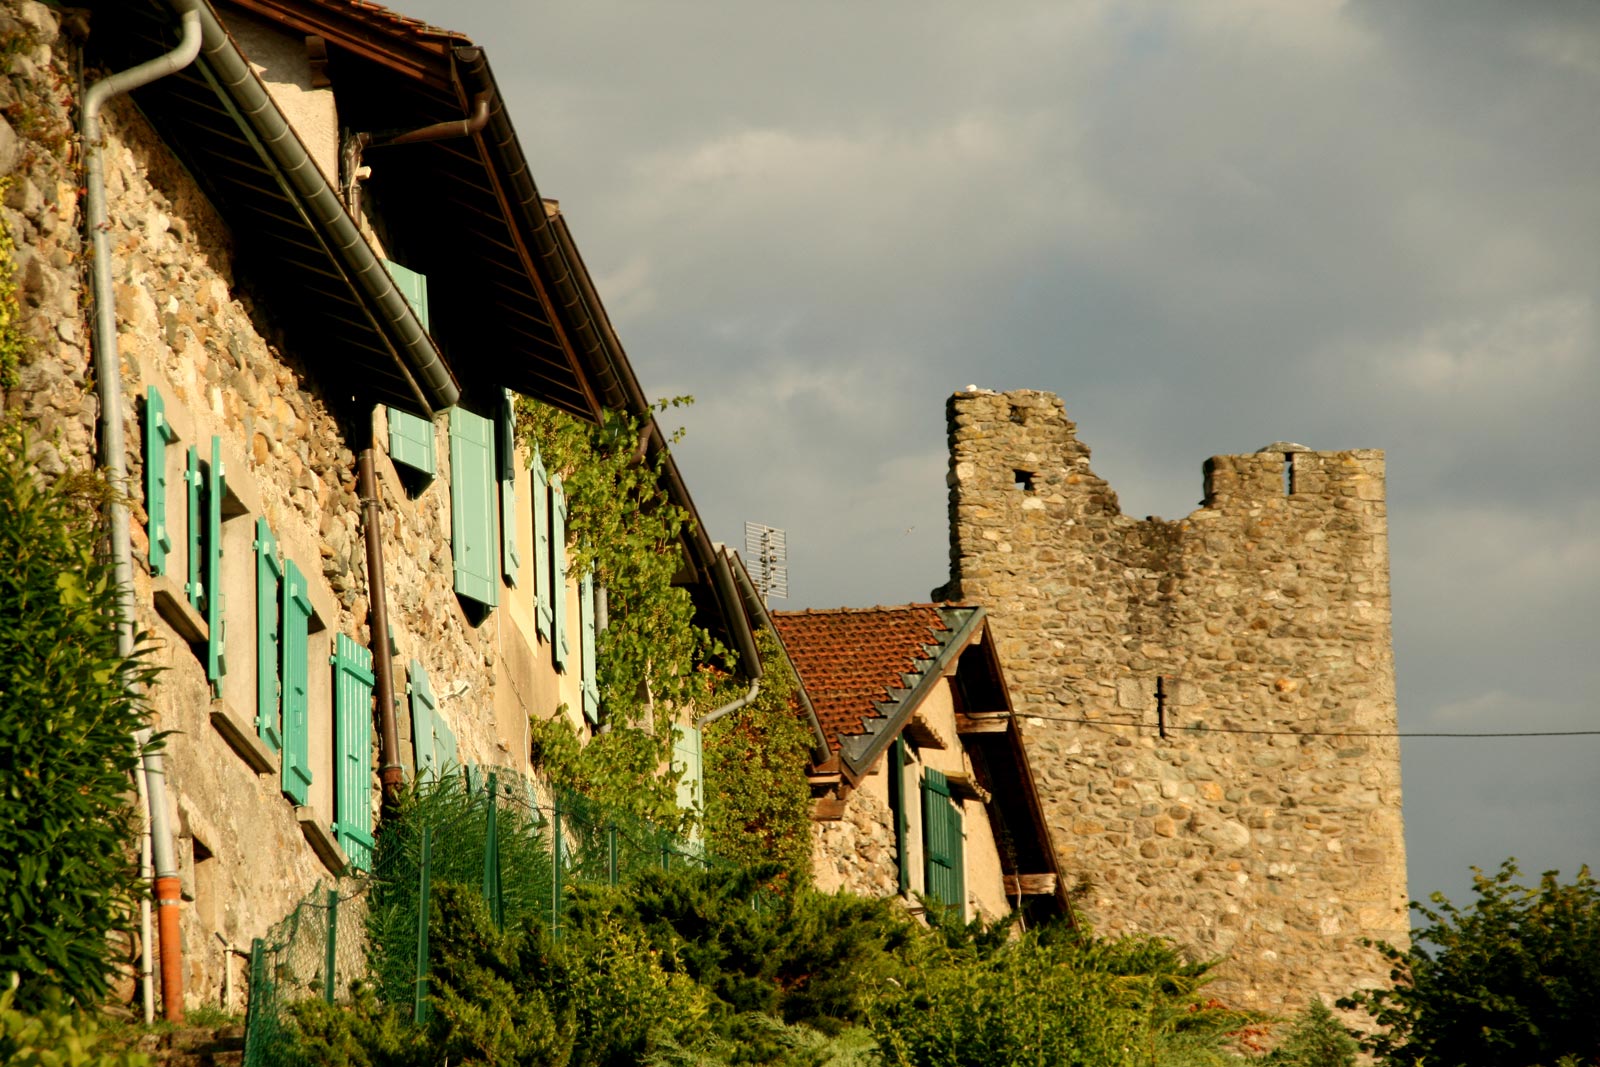 Some houses were built into the ramparts of Yvoire.